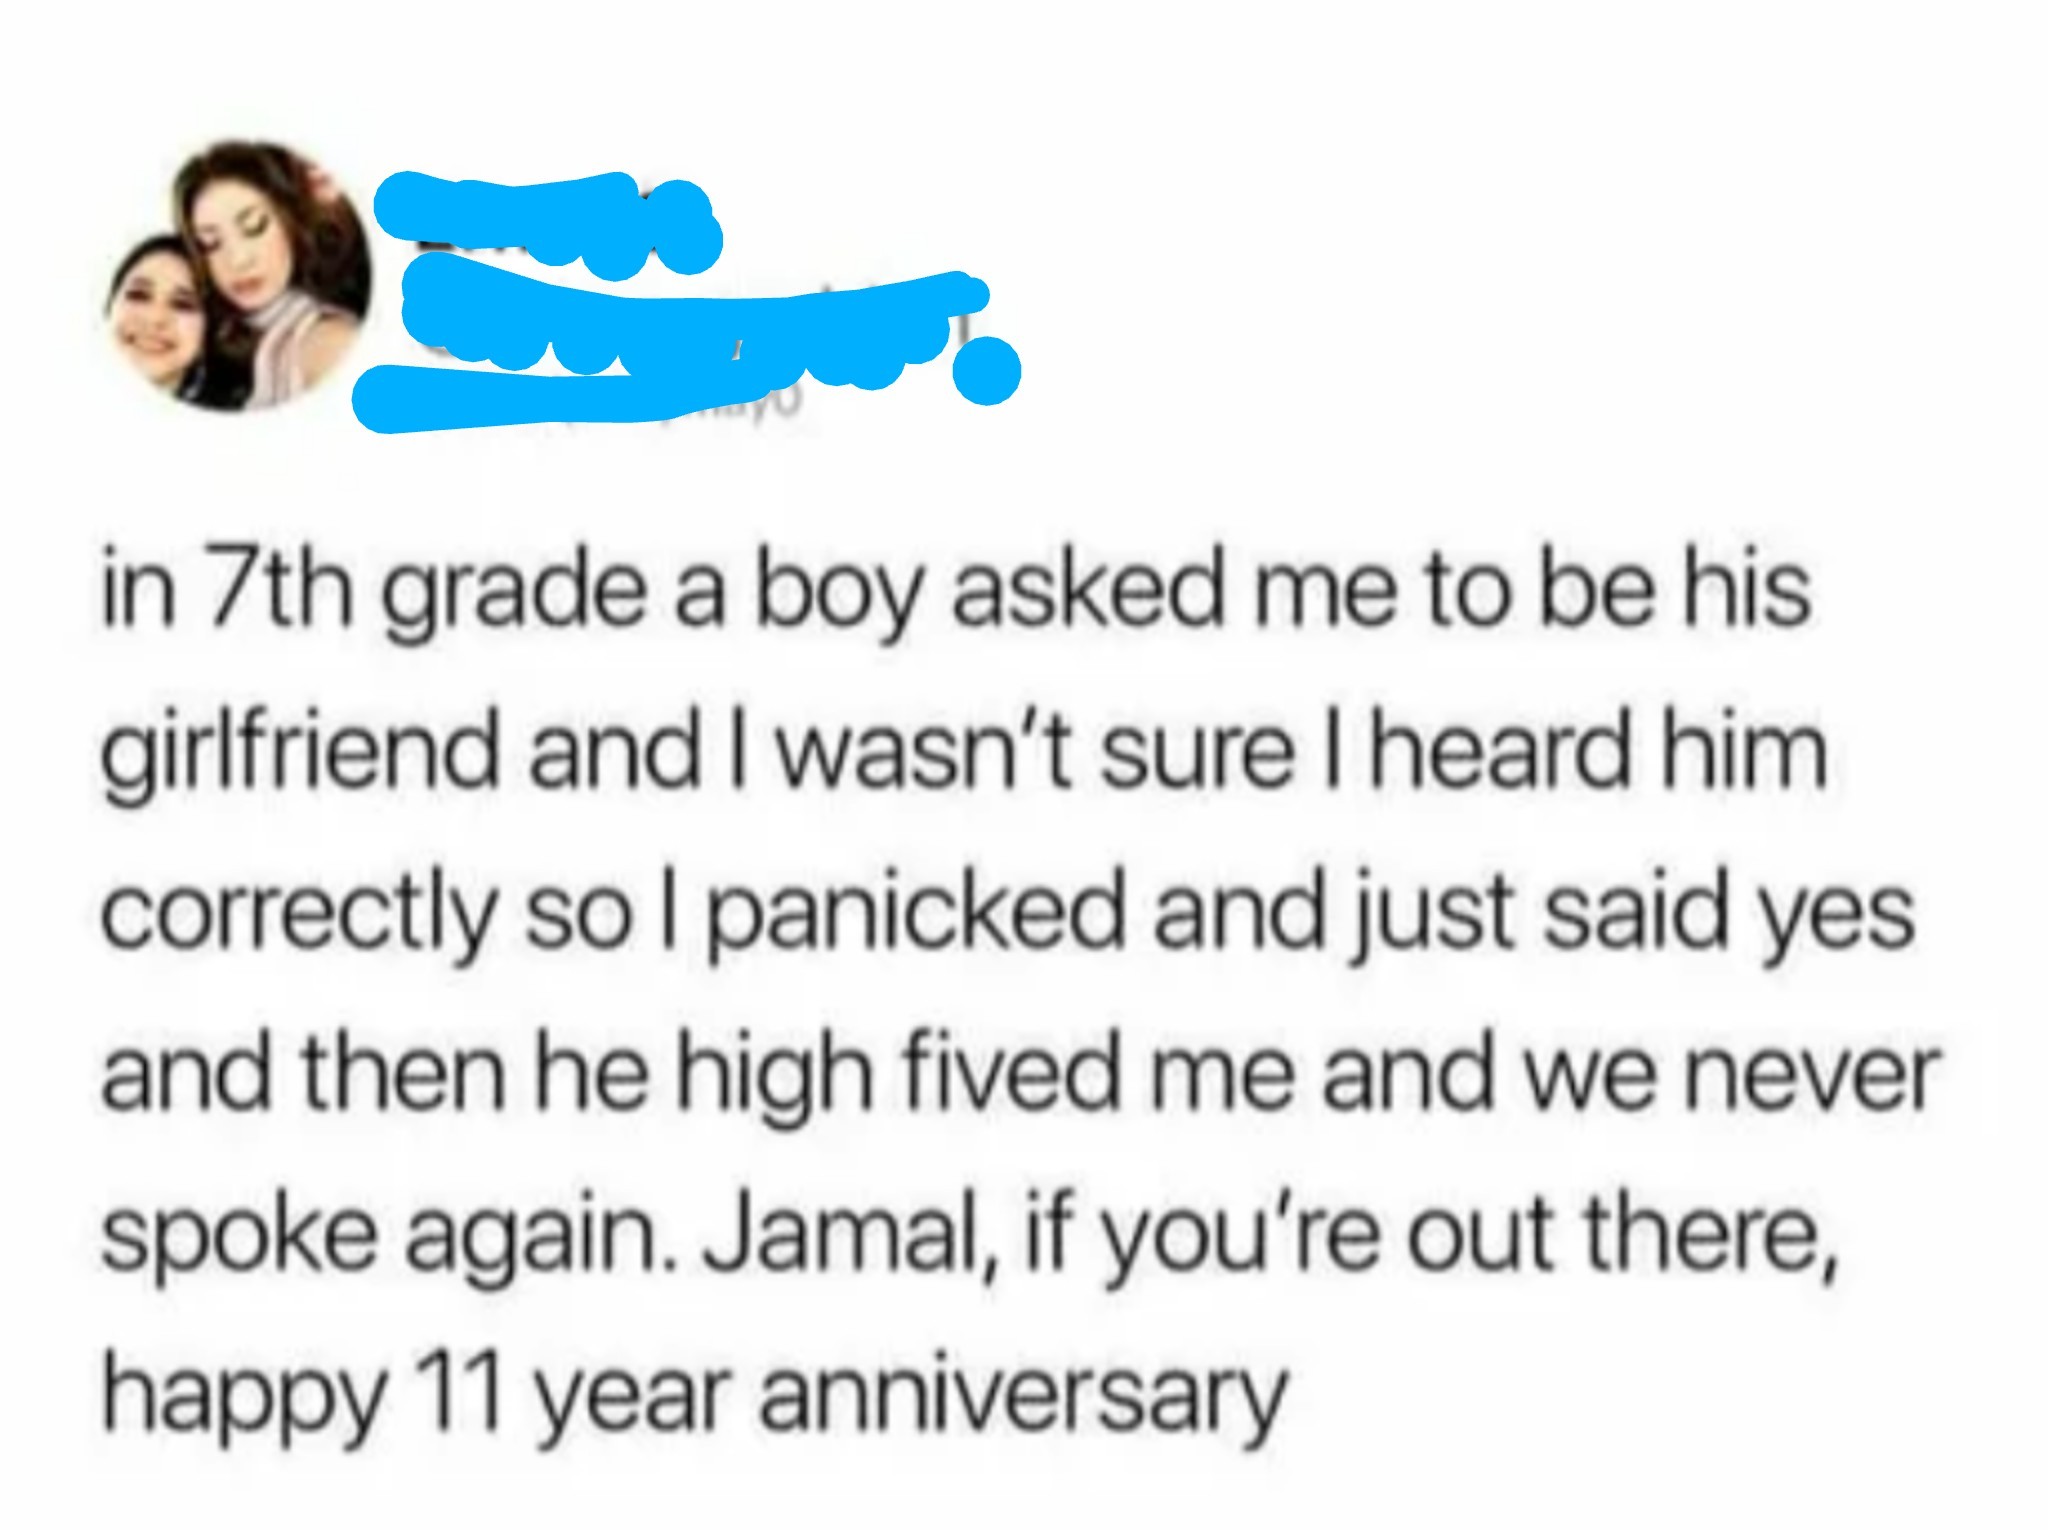 That 7th grader sounds like something I would do - meme